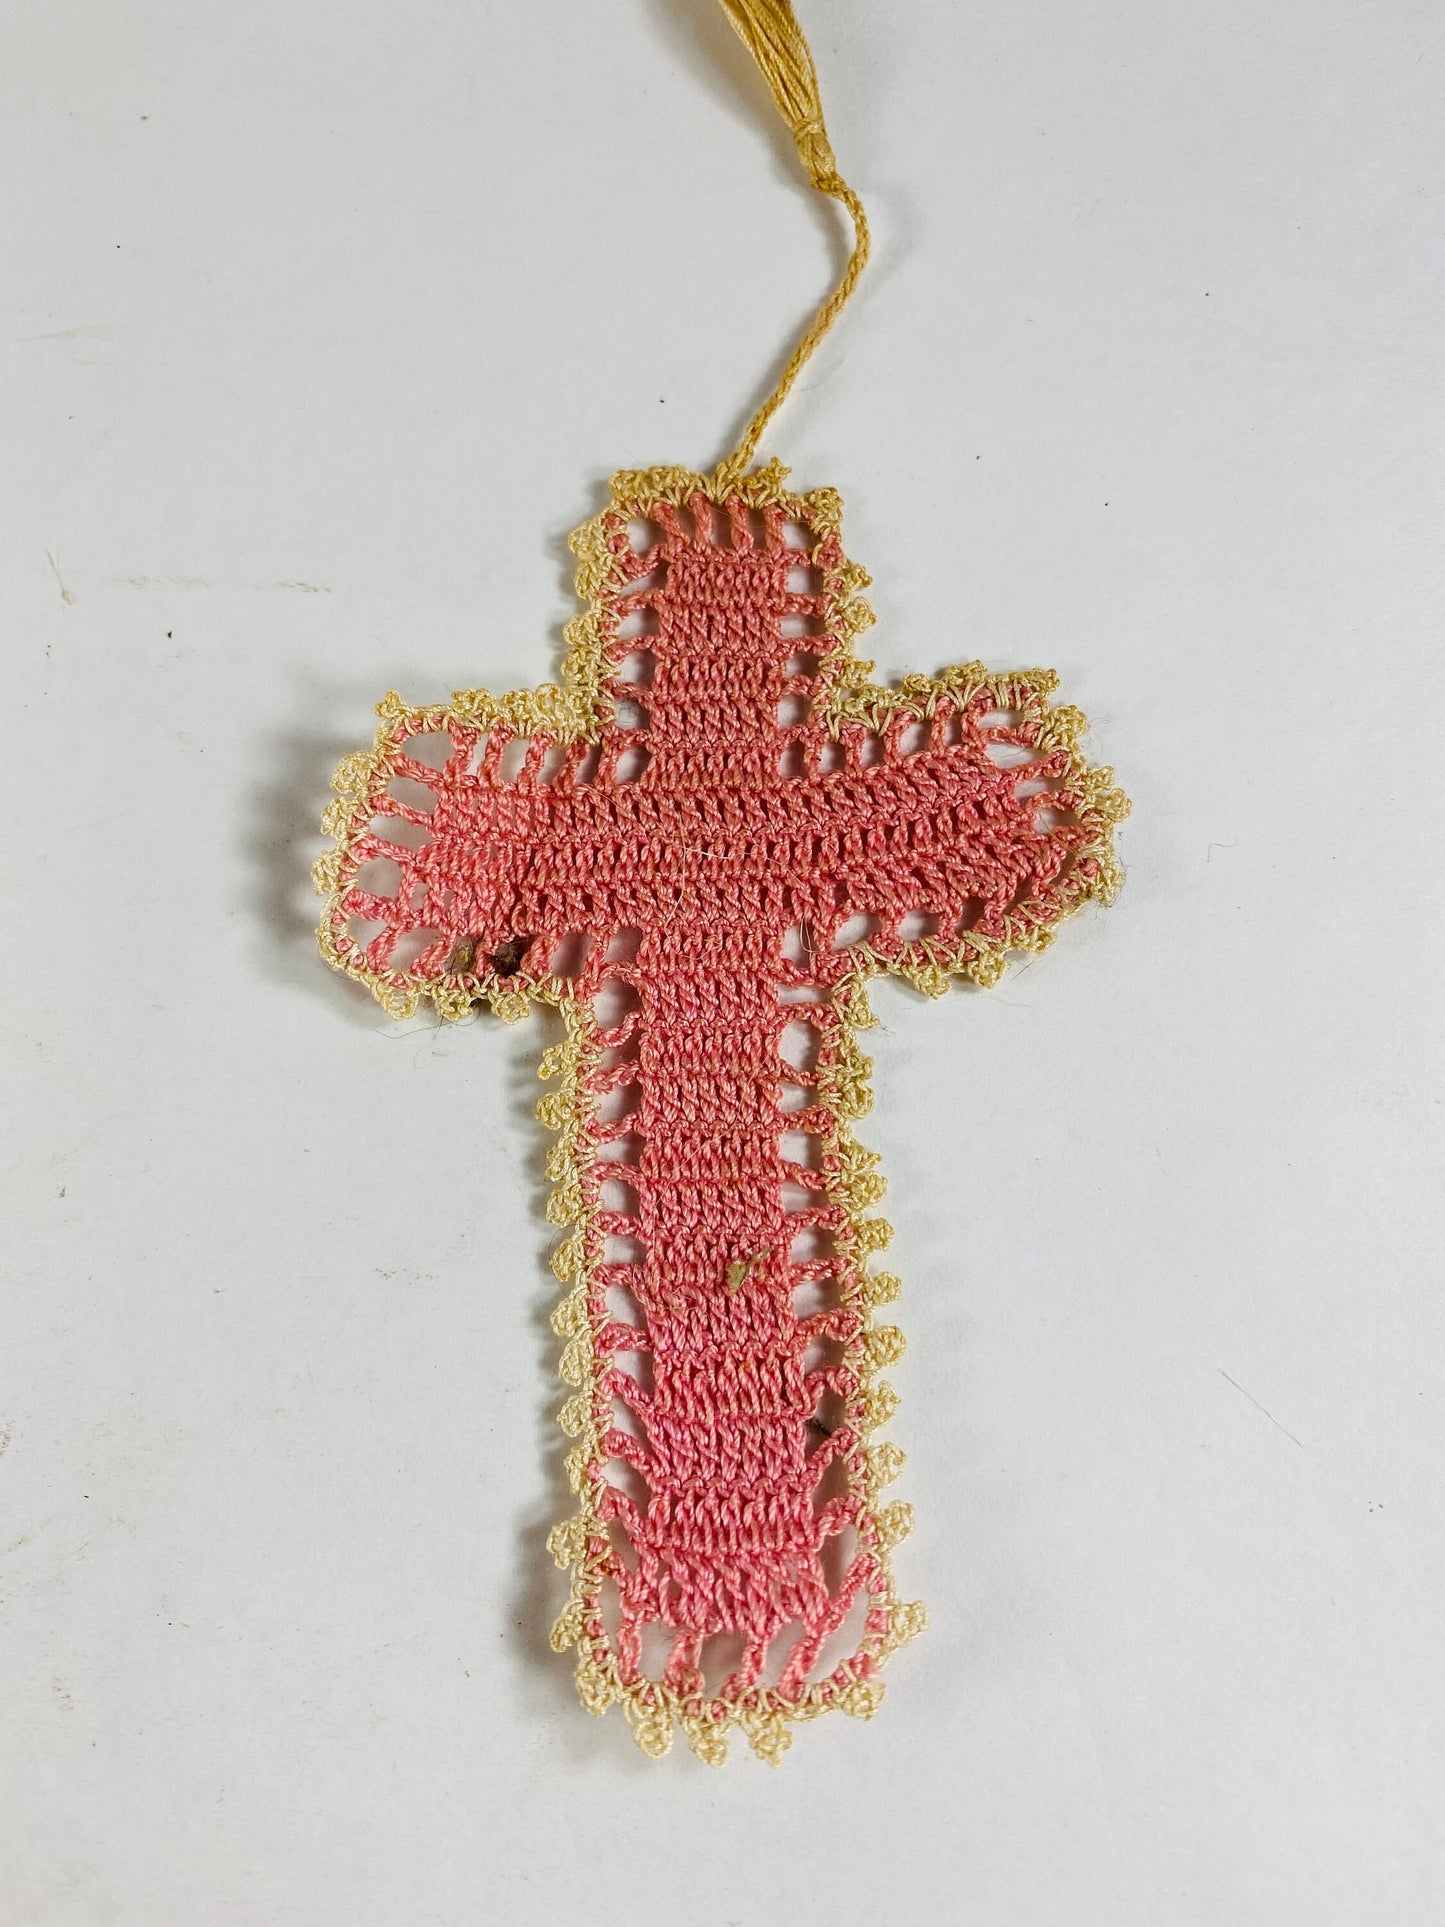 Vintage handmade pink cross bookmark Crochet knitted or macrame religious bookmark unique Christian bible gift! Jesus